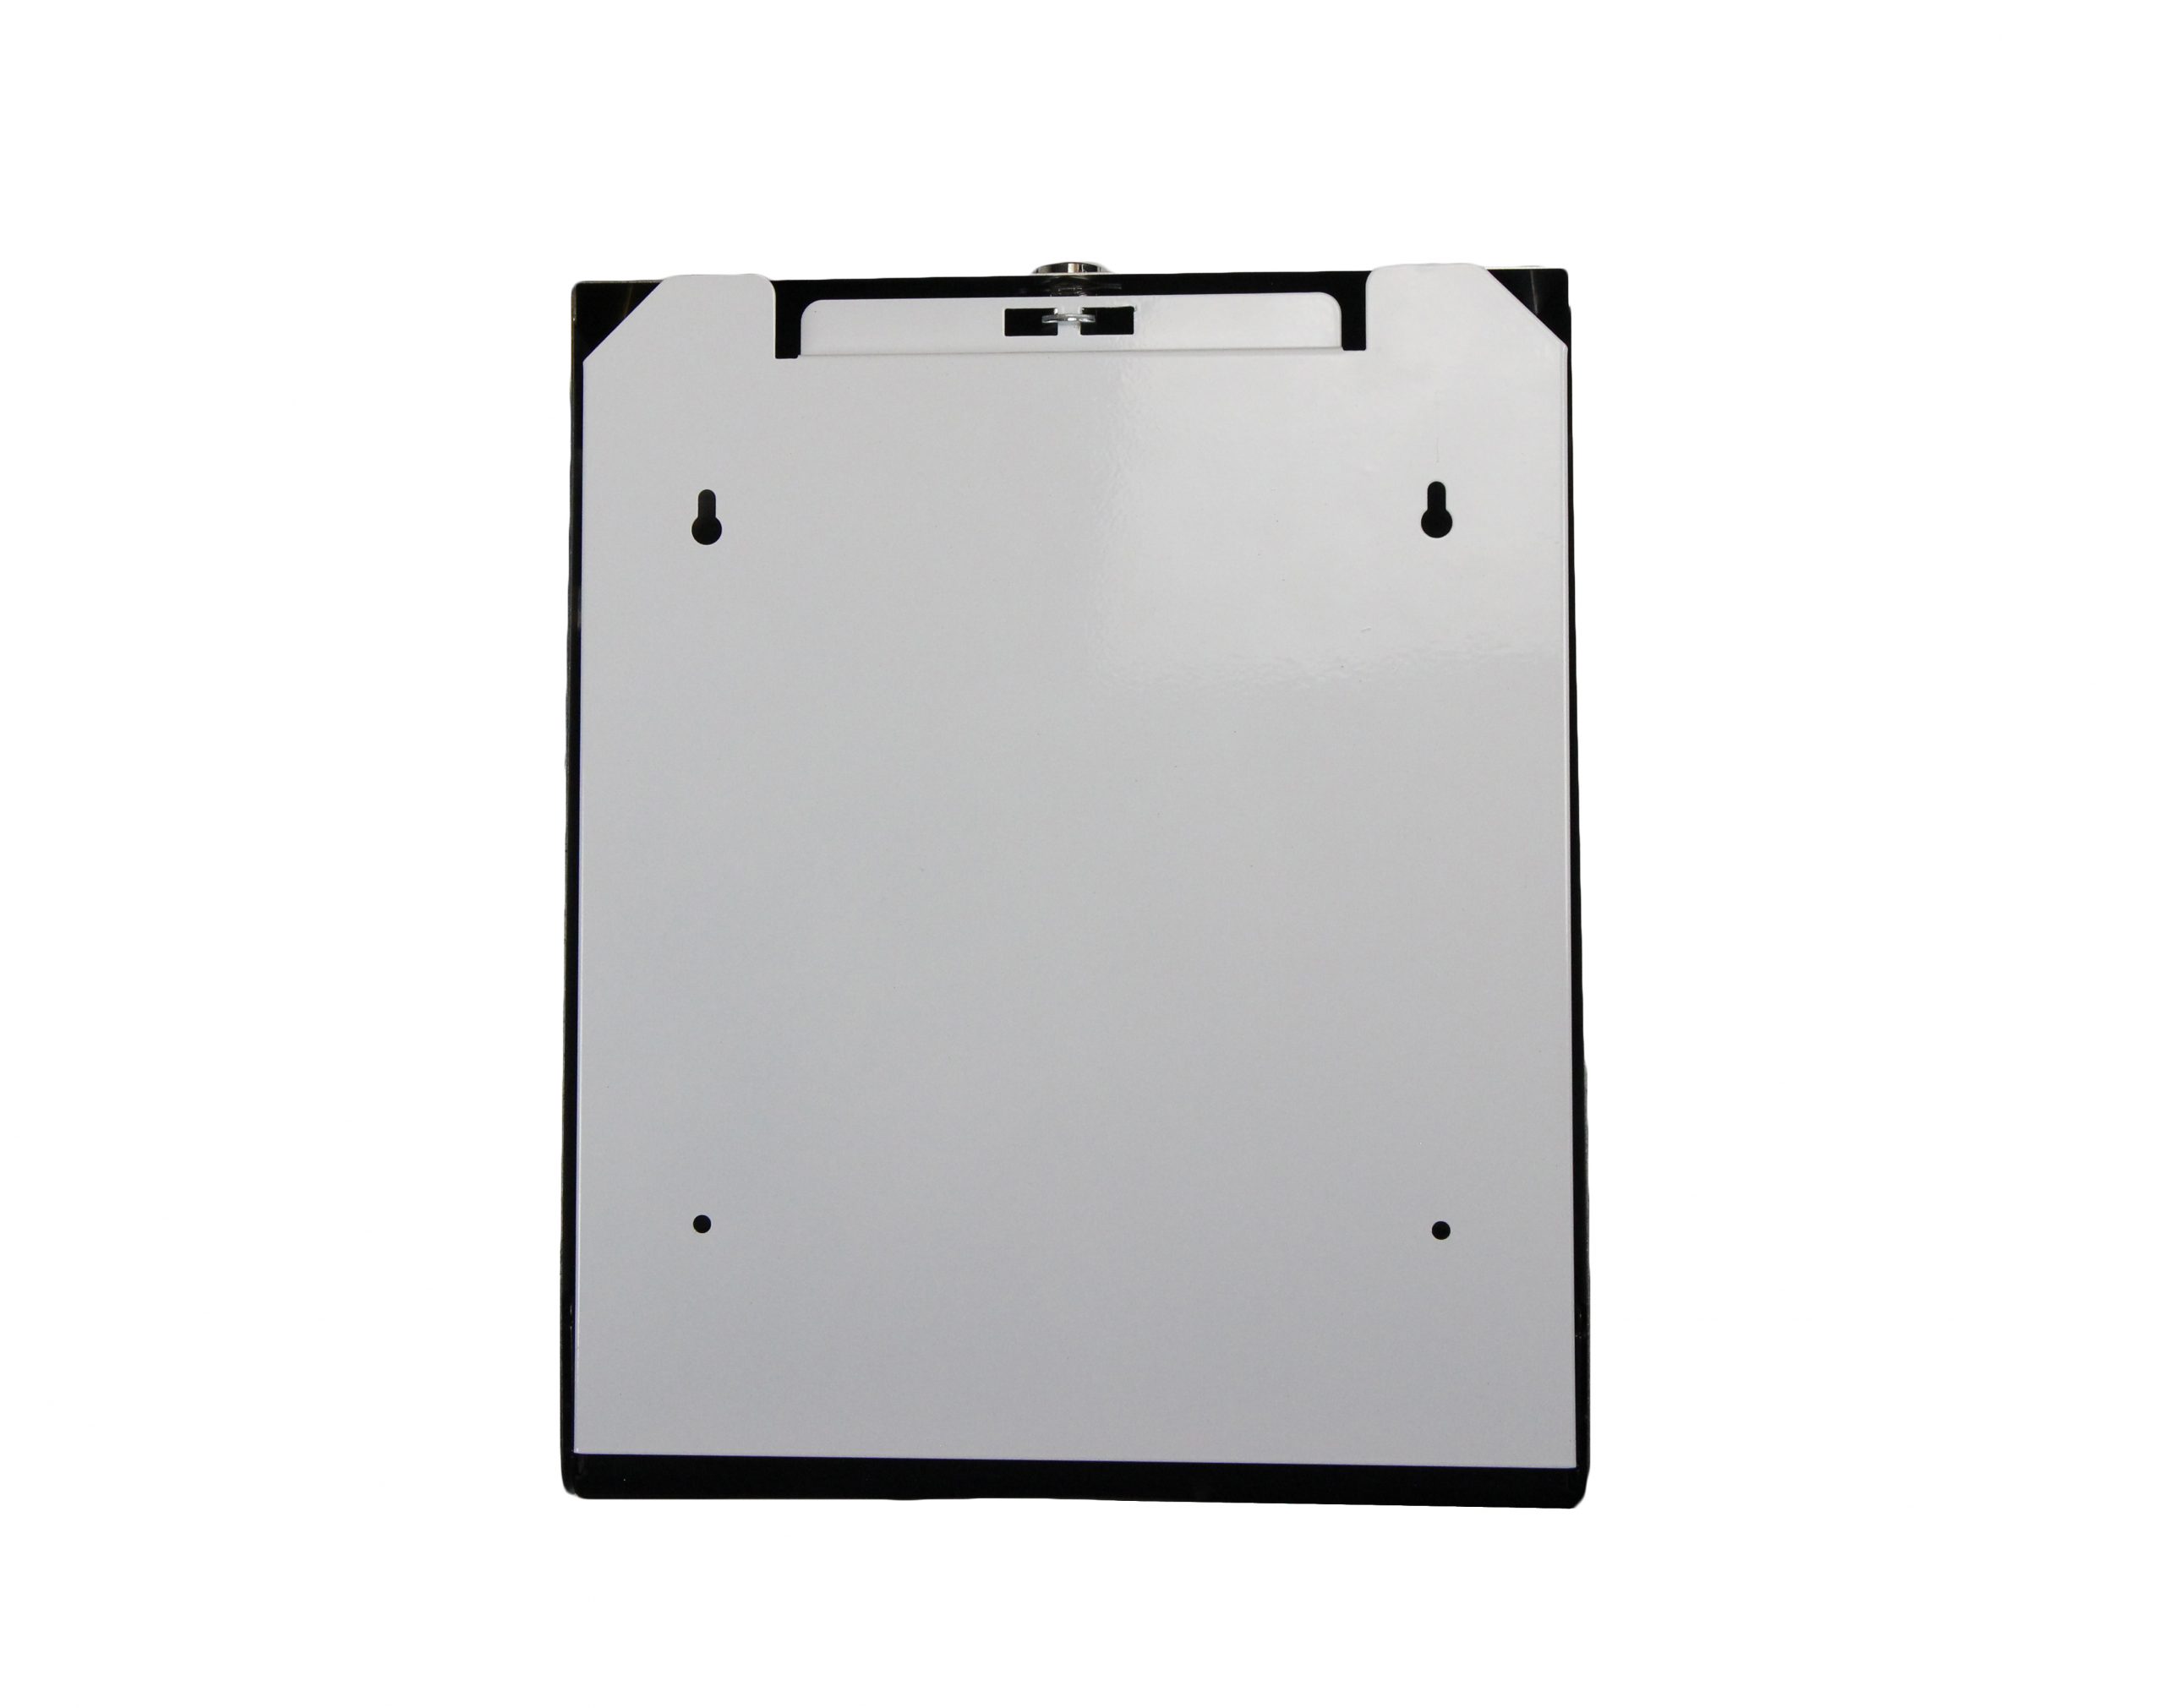 Frost 15 x 0.75 x 10.5 White Paper Product Dispenser